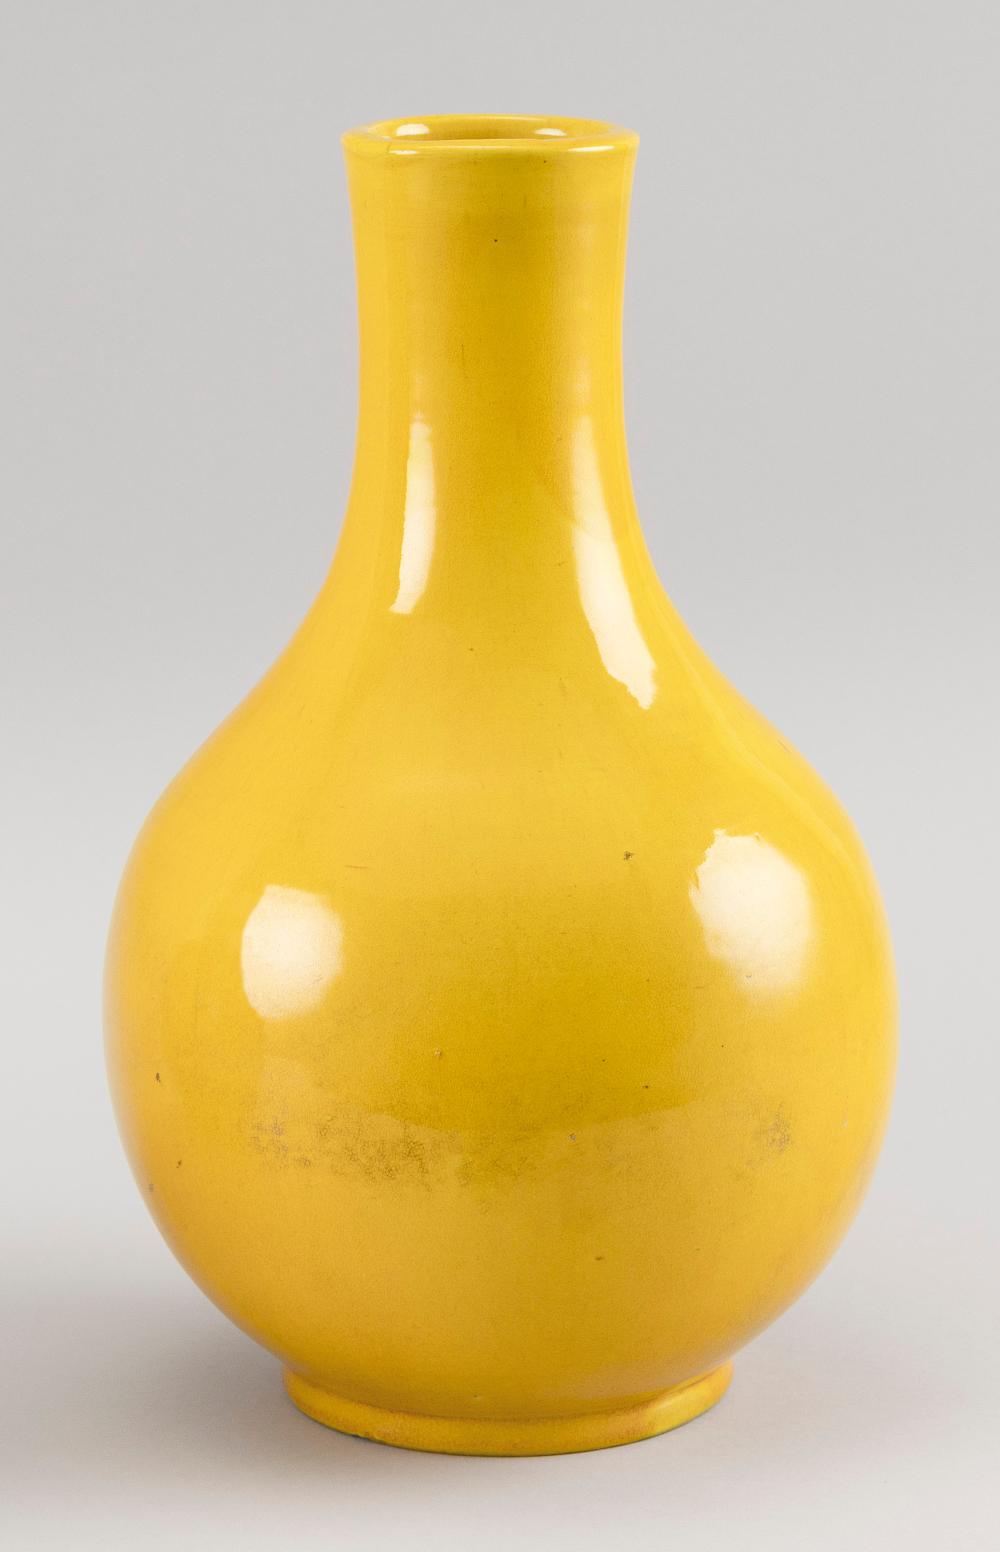 CHINESE IMPERIAL YELLOW PORCELAIN